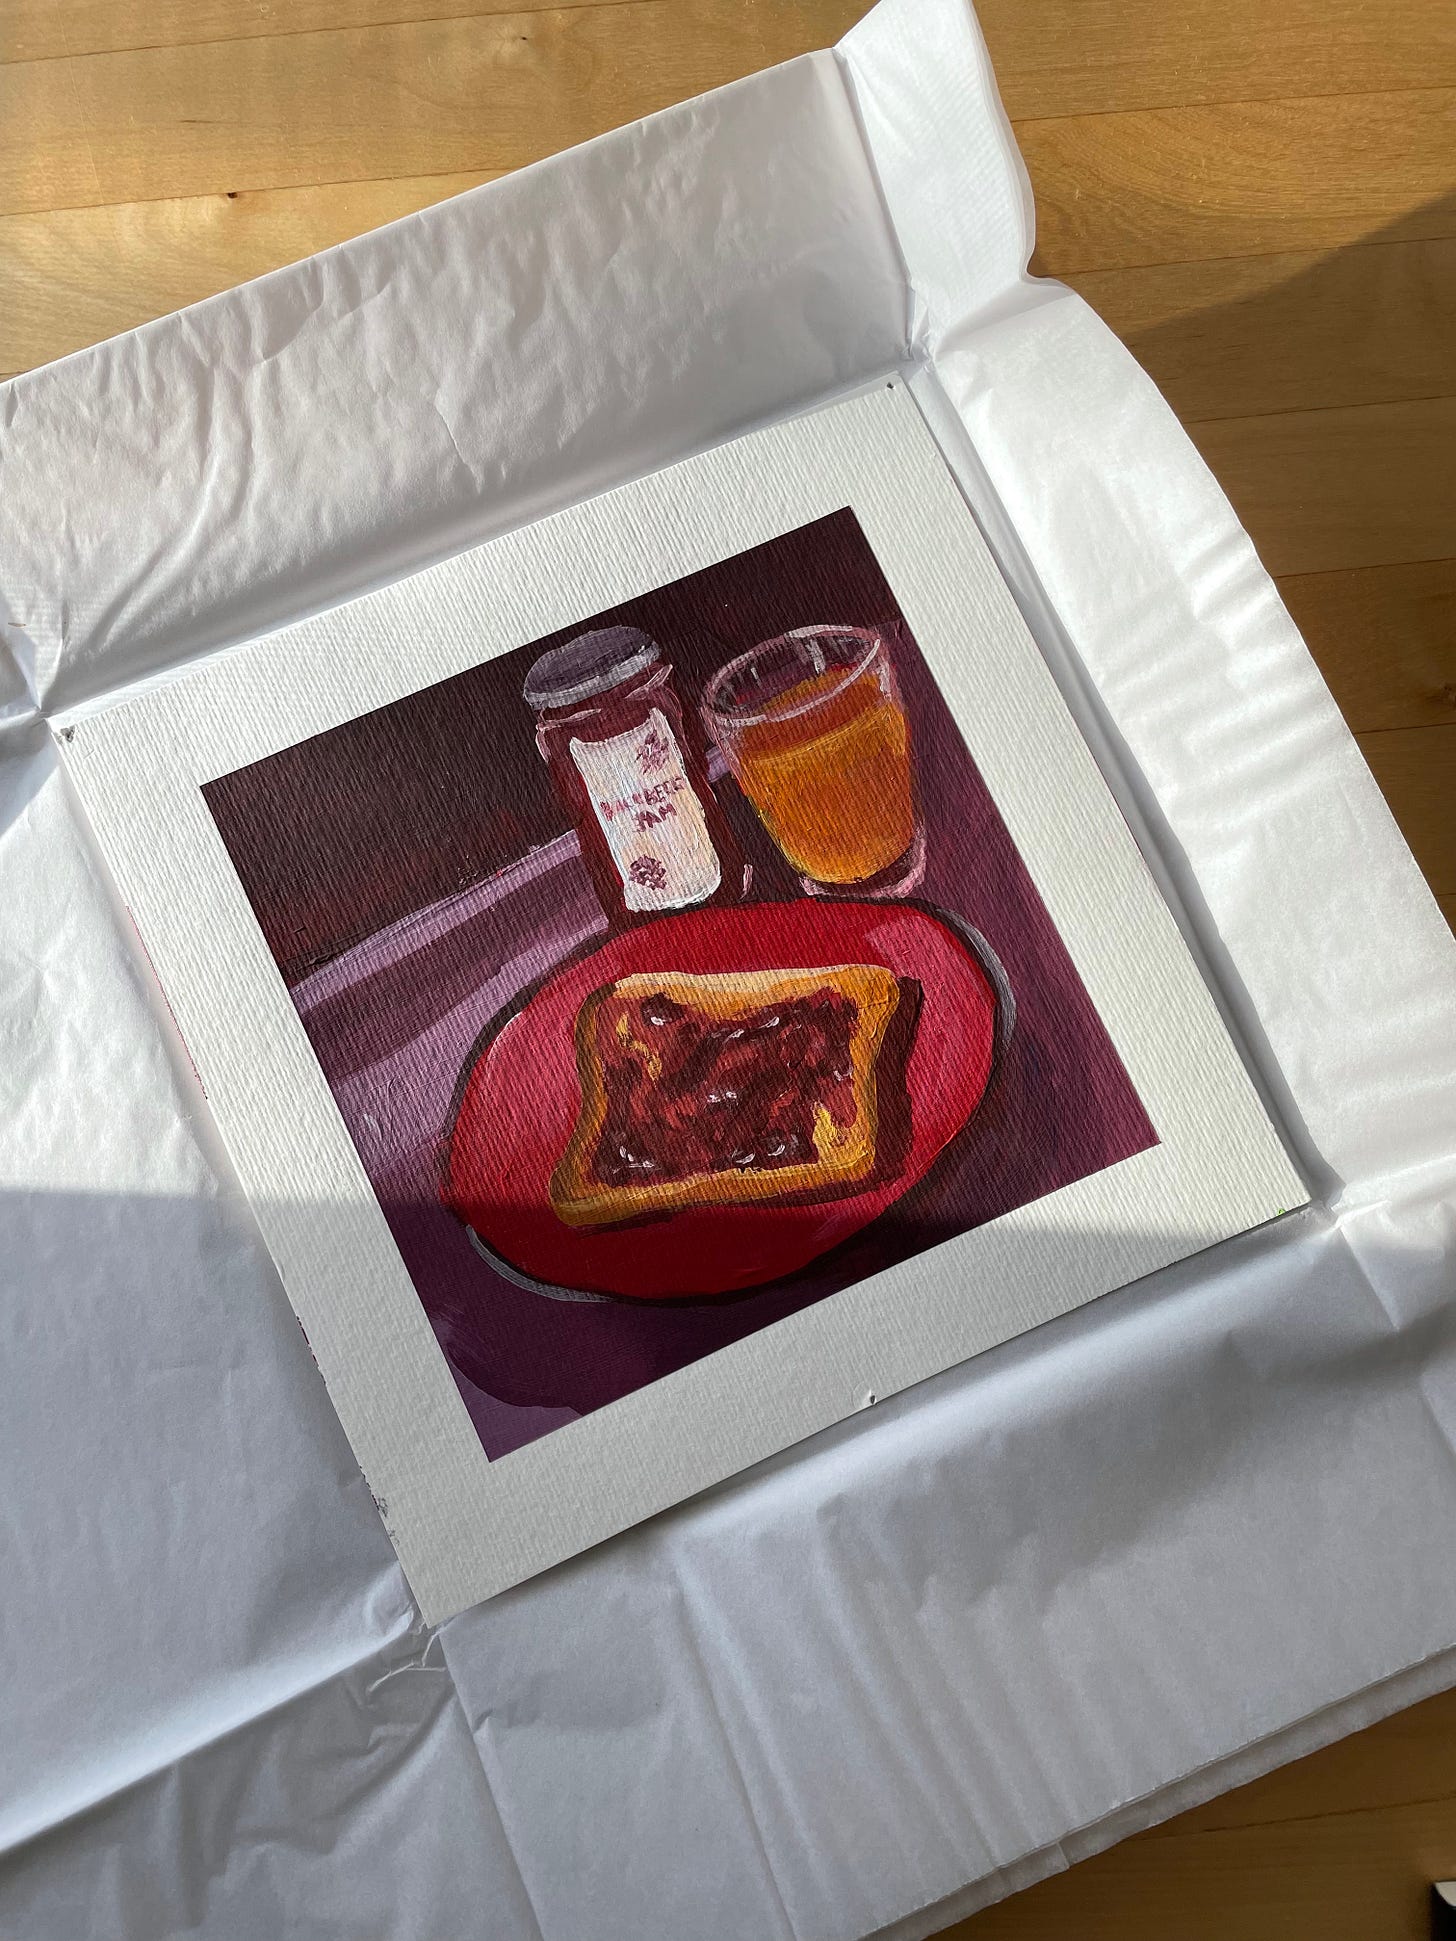 Square painting of a slice of toast, blackberry jam and orange juice photographed on a sunny dining table.